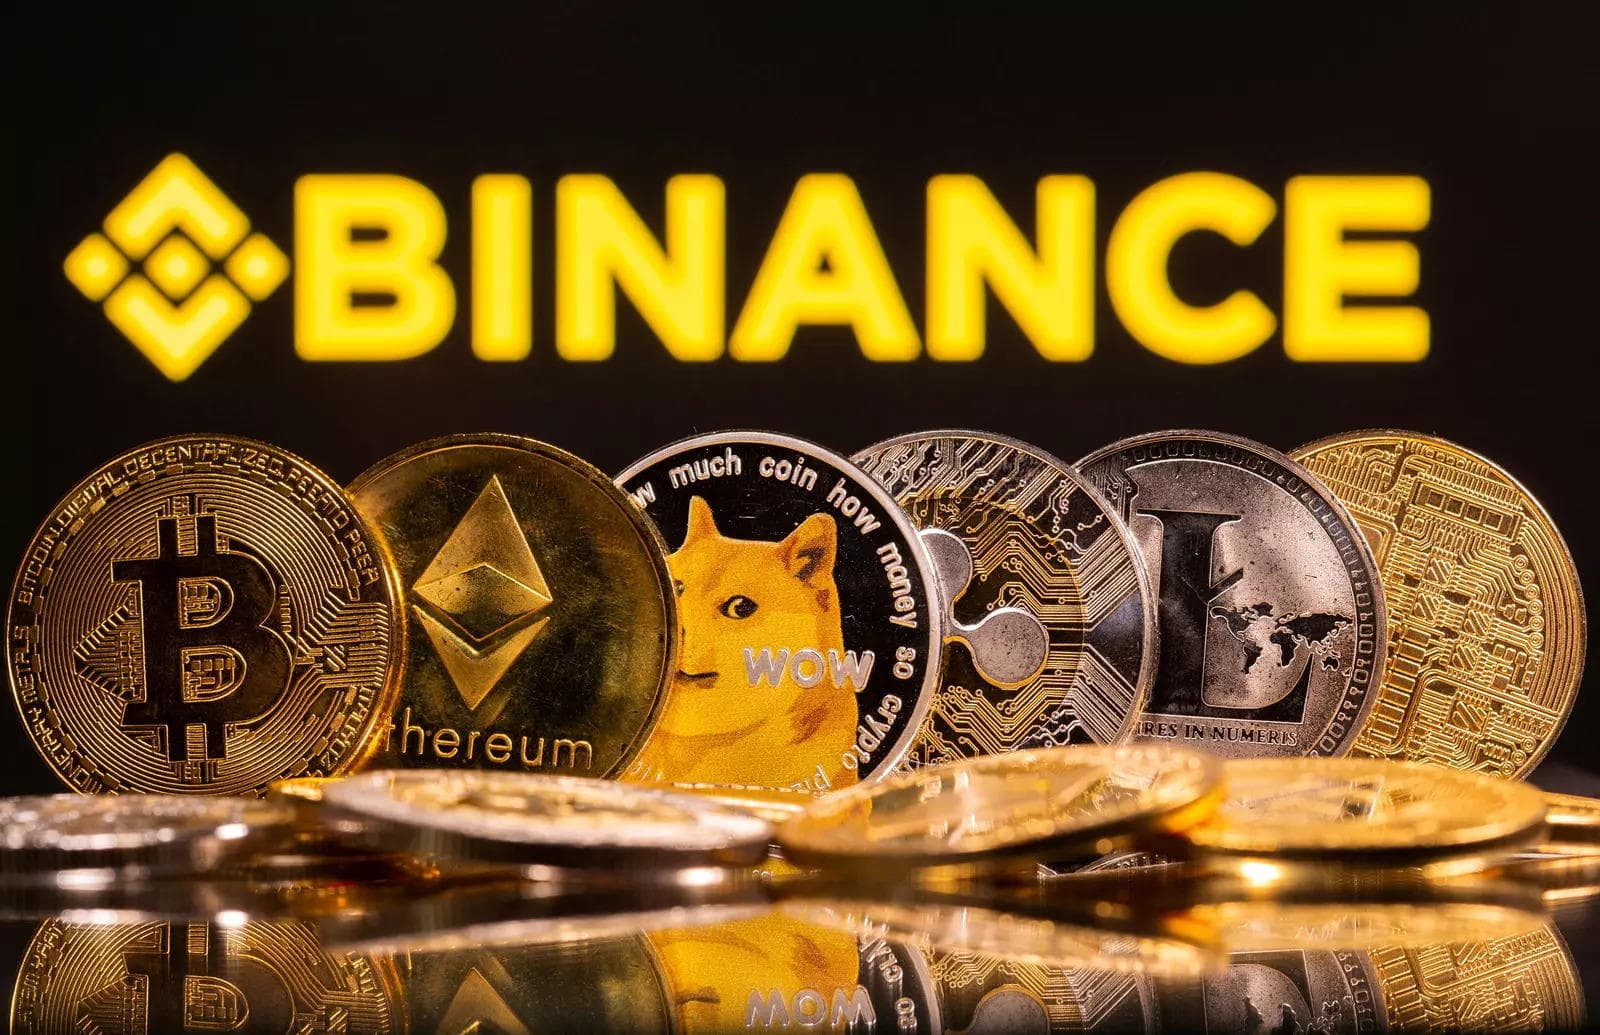 Reuters: US Prosecutors Look to Charge Binance Executives on Possible Money Laundering Violations